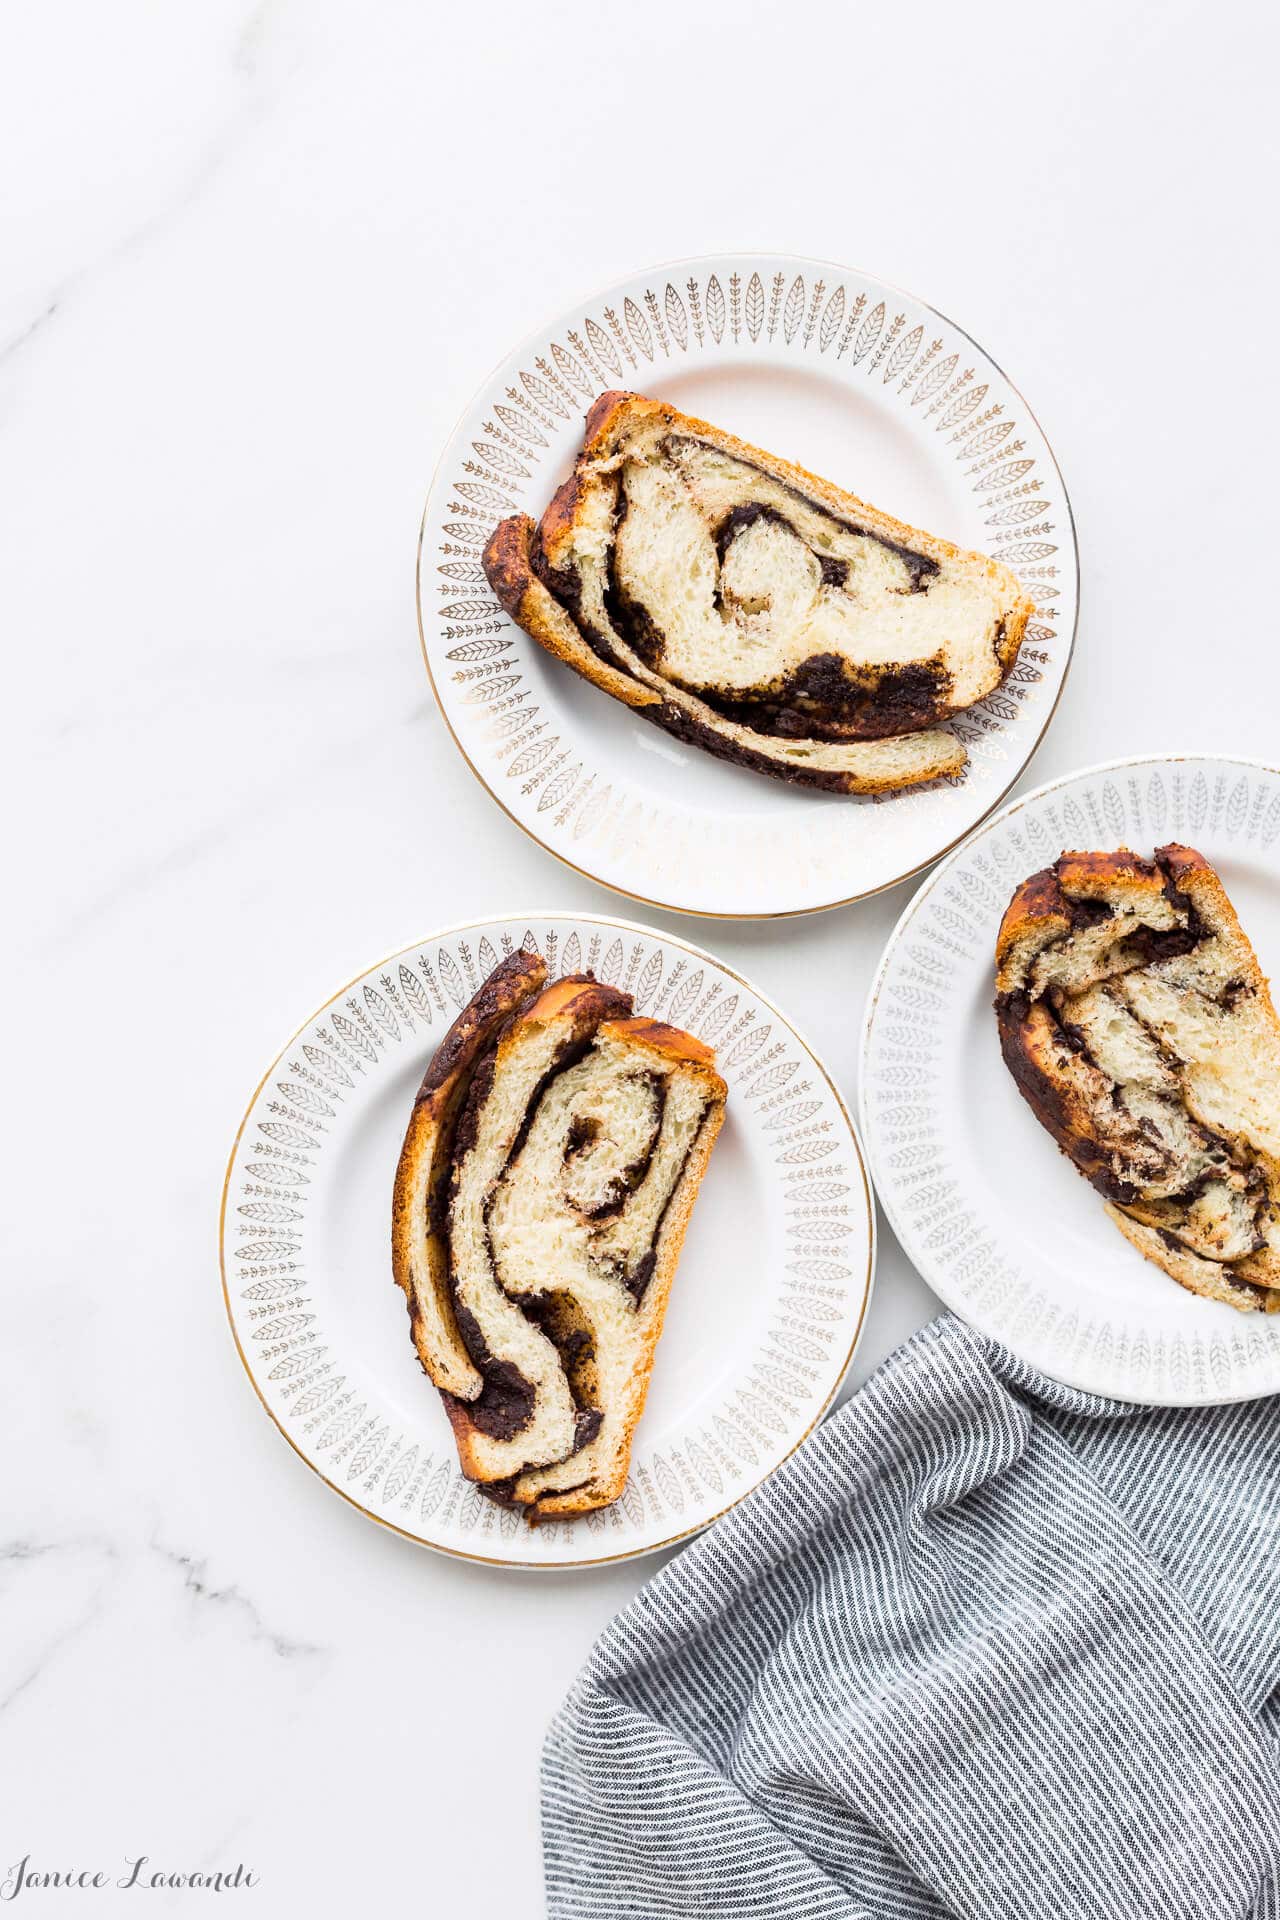 Slices of chocolate babka bread on white plates with a striped napkin